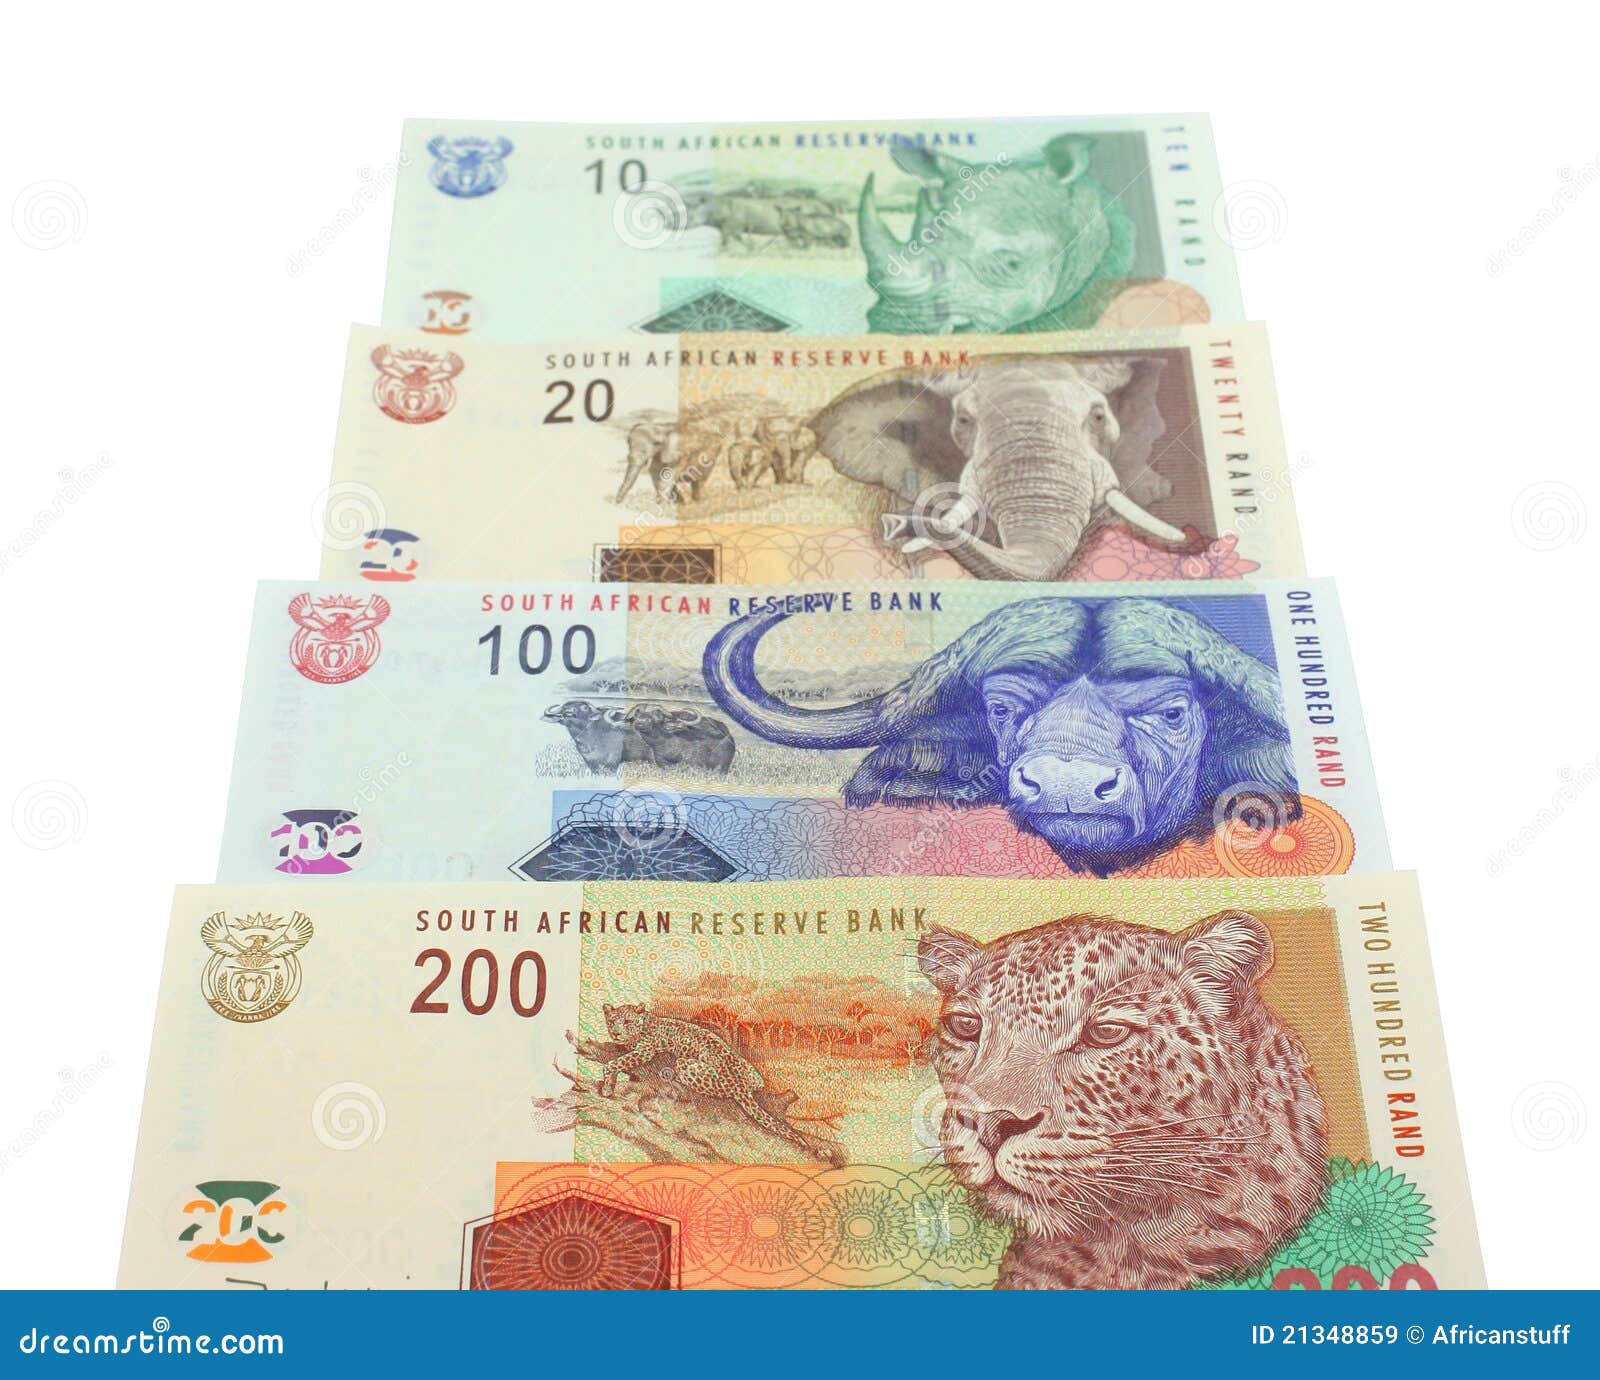 south african money notes stock image image of exchange